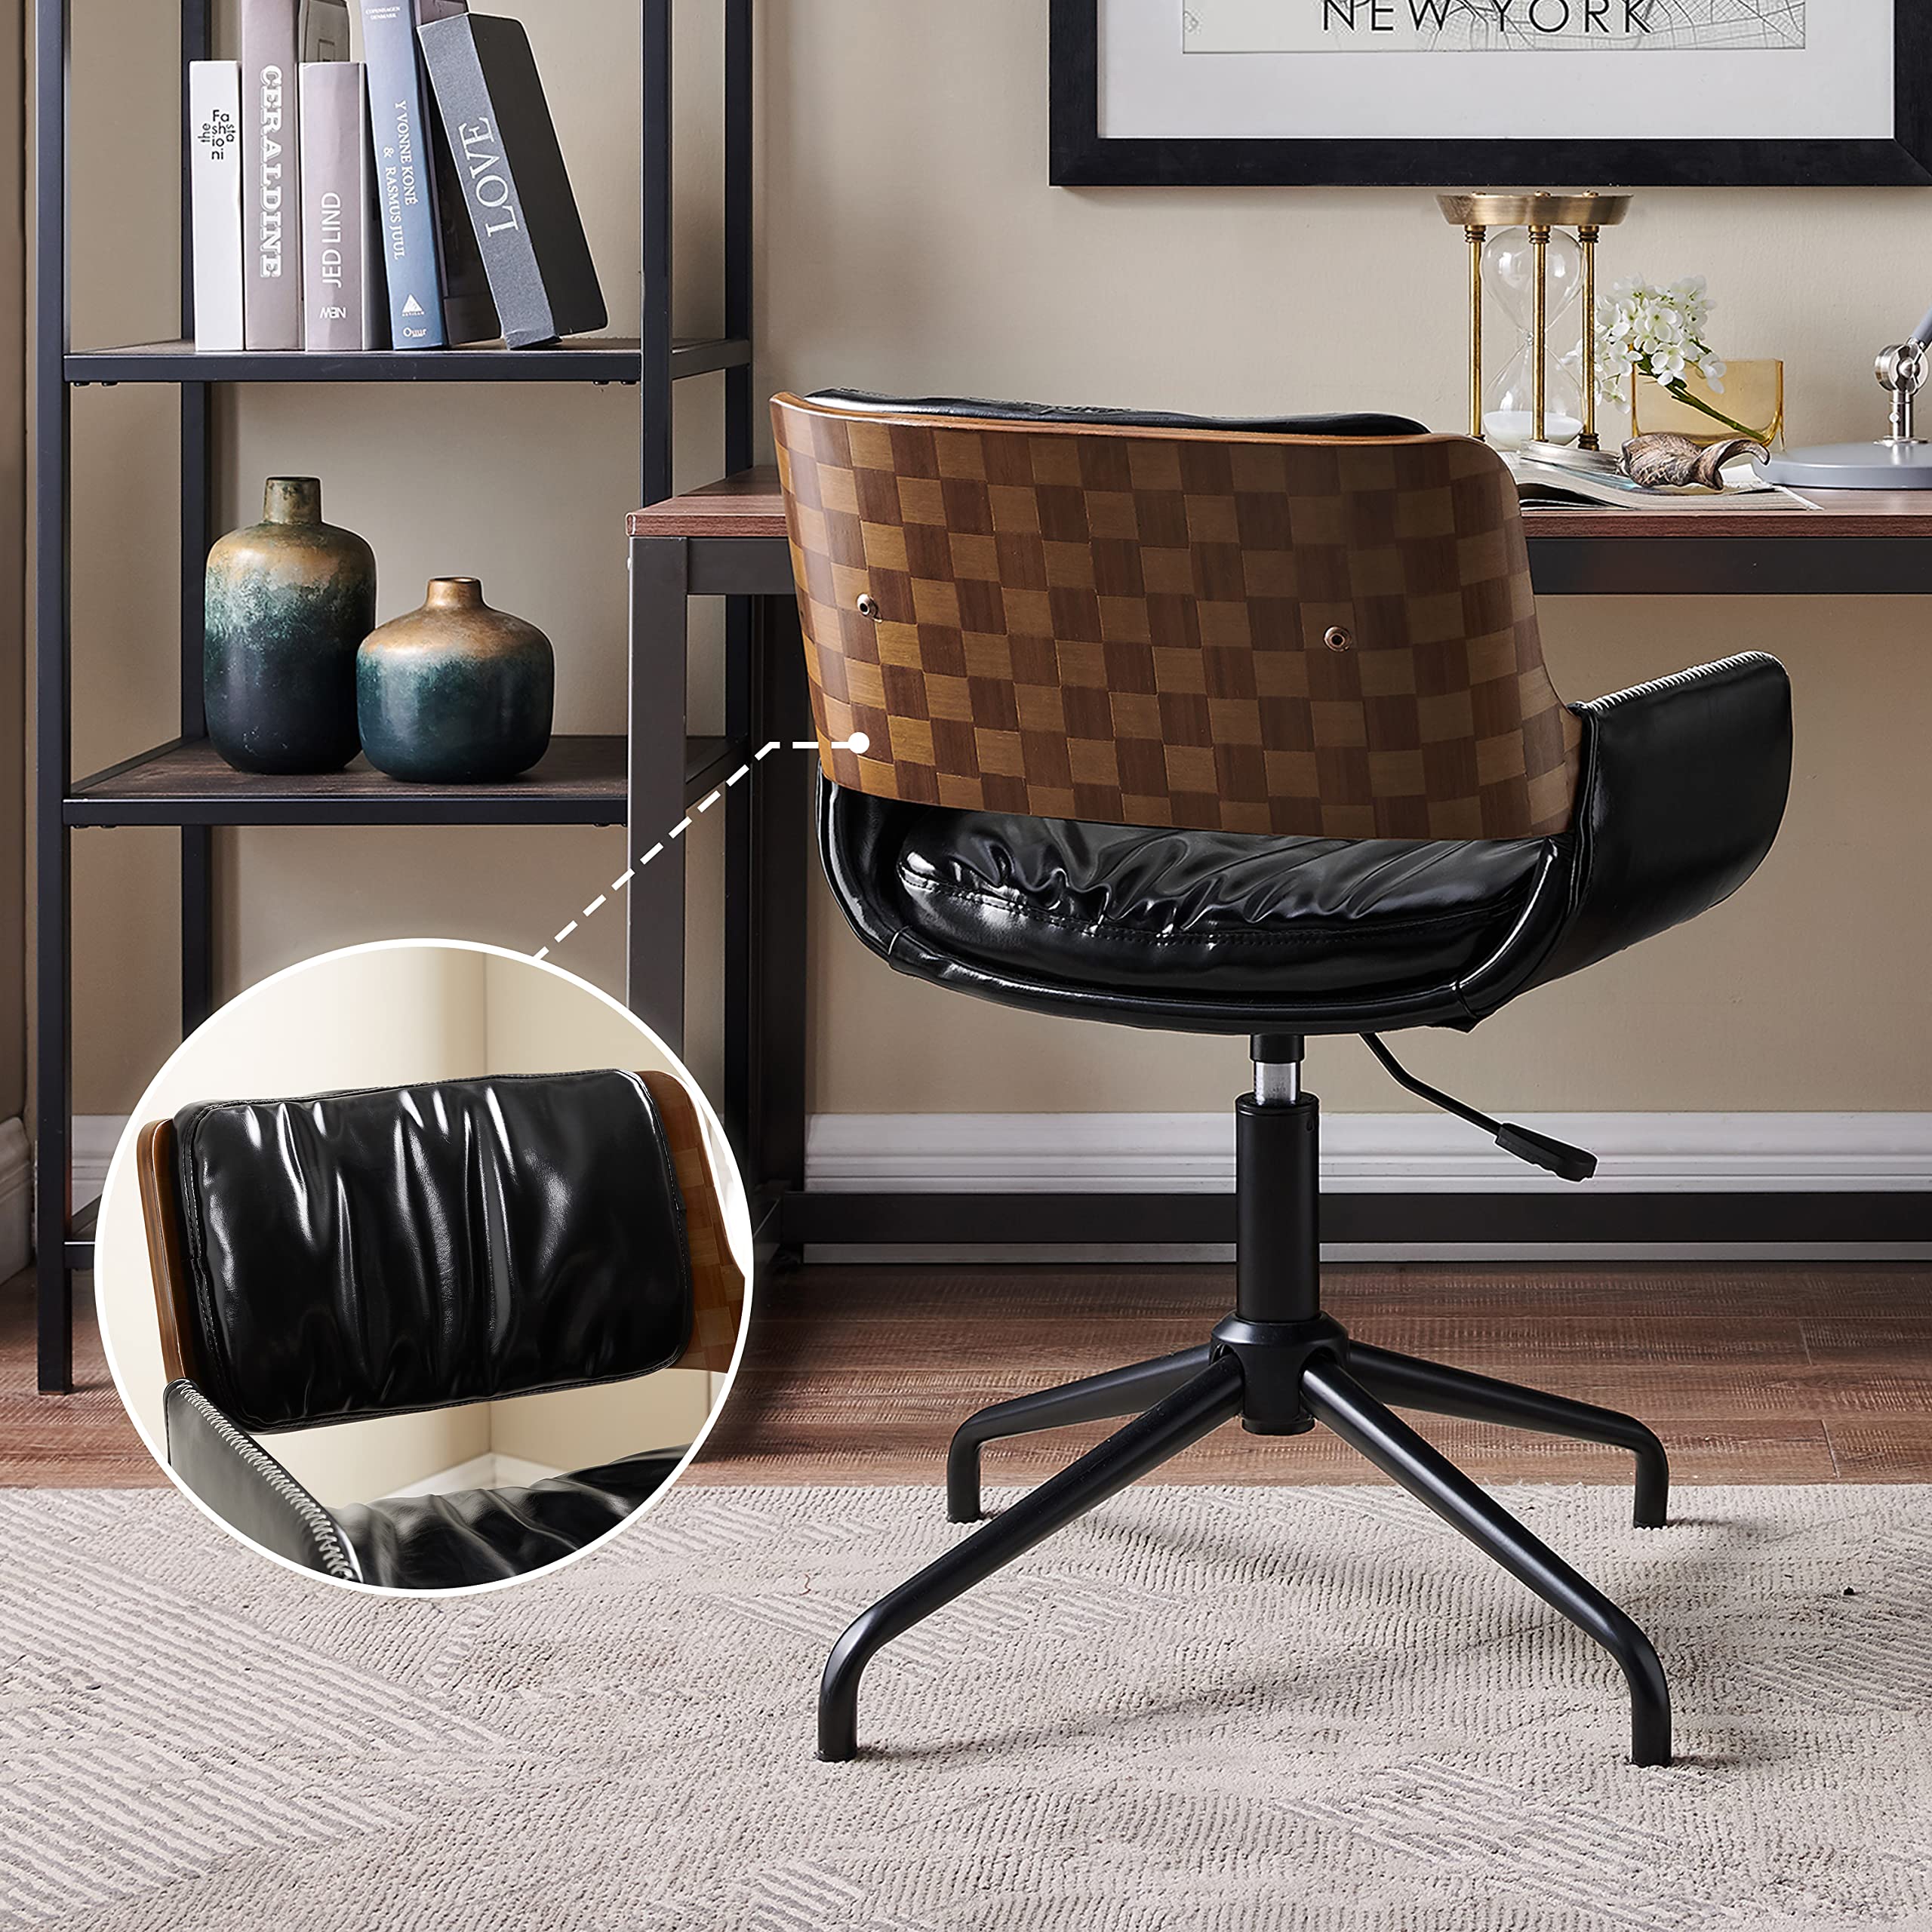 Volans Mid Century Modern Swivel Home Office Desk Chair No Wheels, Faux Leather Adjustable Height Task Chair with Bentwood Back, Black